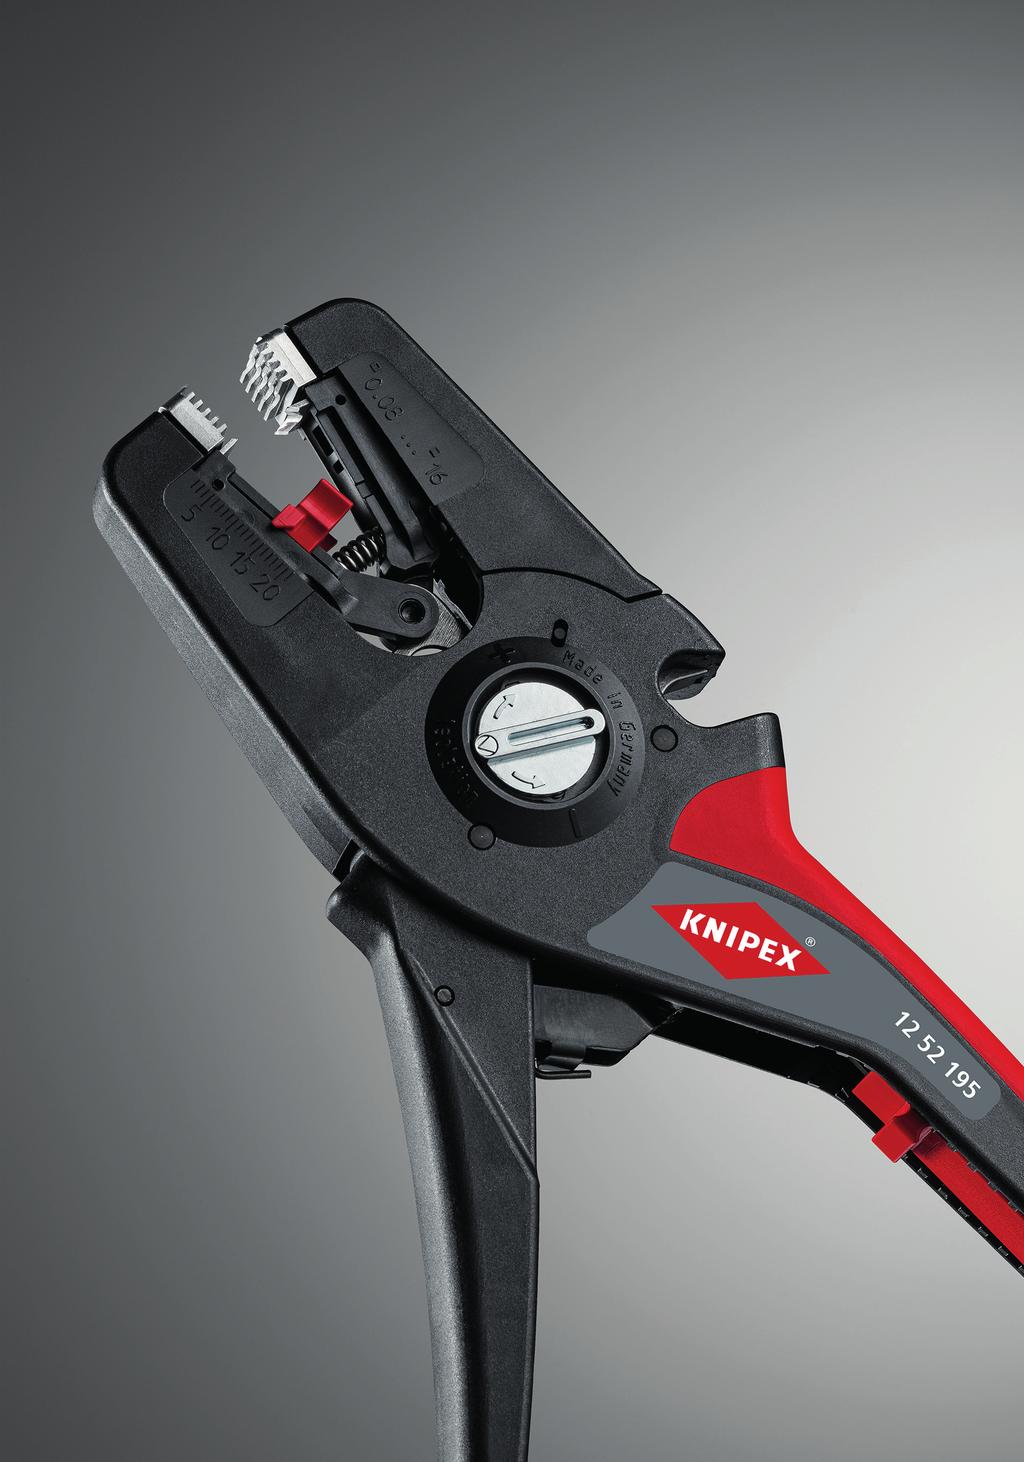 KNIPEX Quality Made in Germany. Nyheter PDF Gratis nedladdning